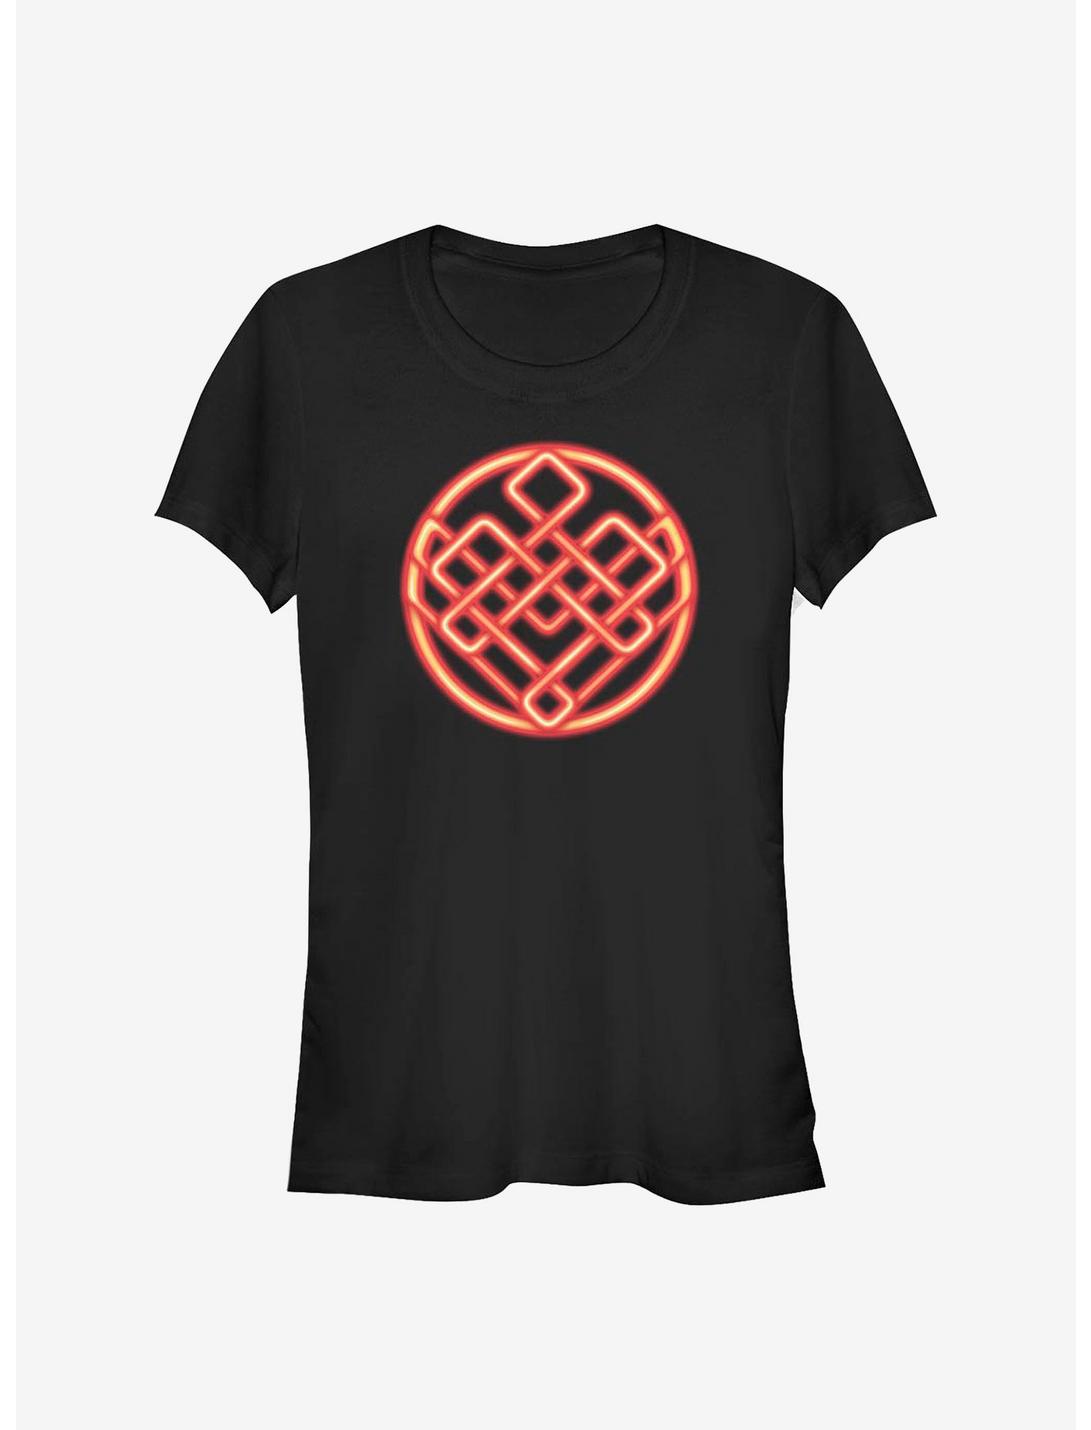 Marvel Shang-Chi And The Legend Of The Ten Rings Symbol Girls T-Shirt, BLACK, hi-res